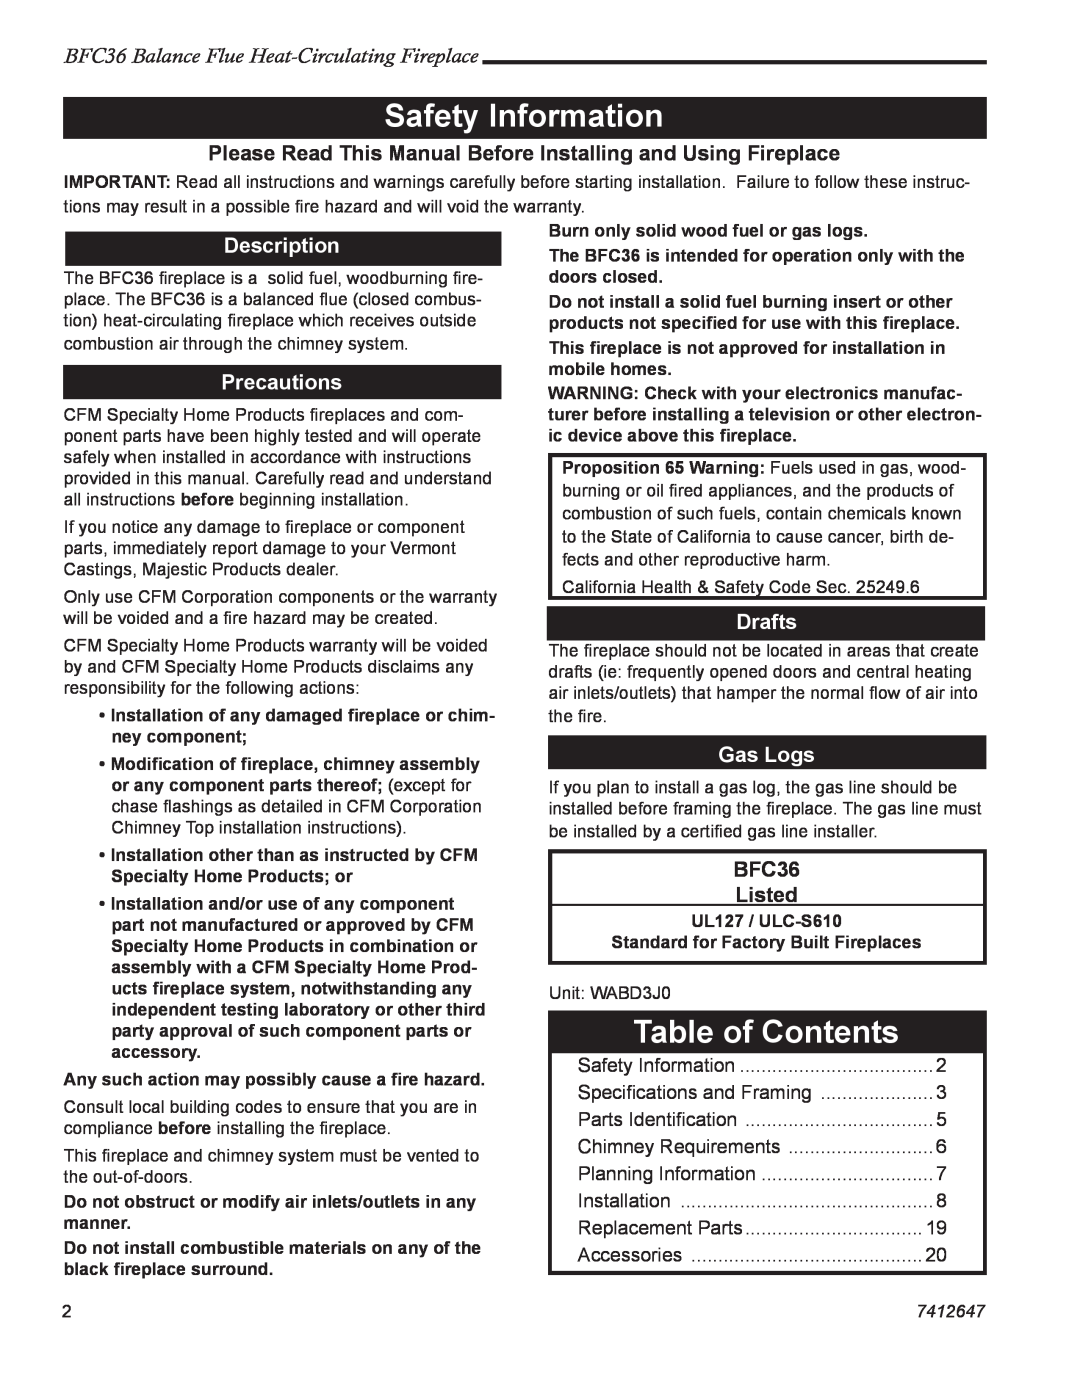 Vermont Casting 647 BFC Safety Information, Table of Contents, BFC36 Balance Flue Heat-CirculatingFireplace, Description 